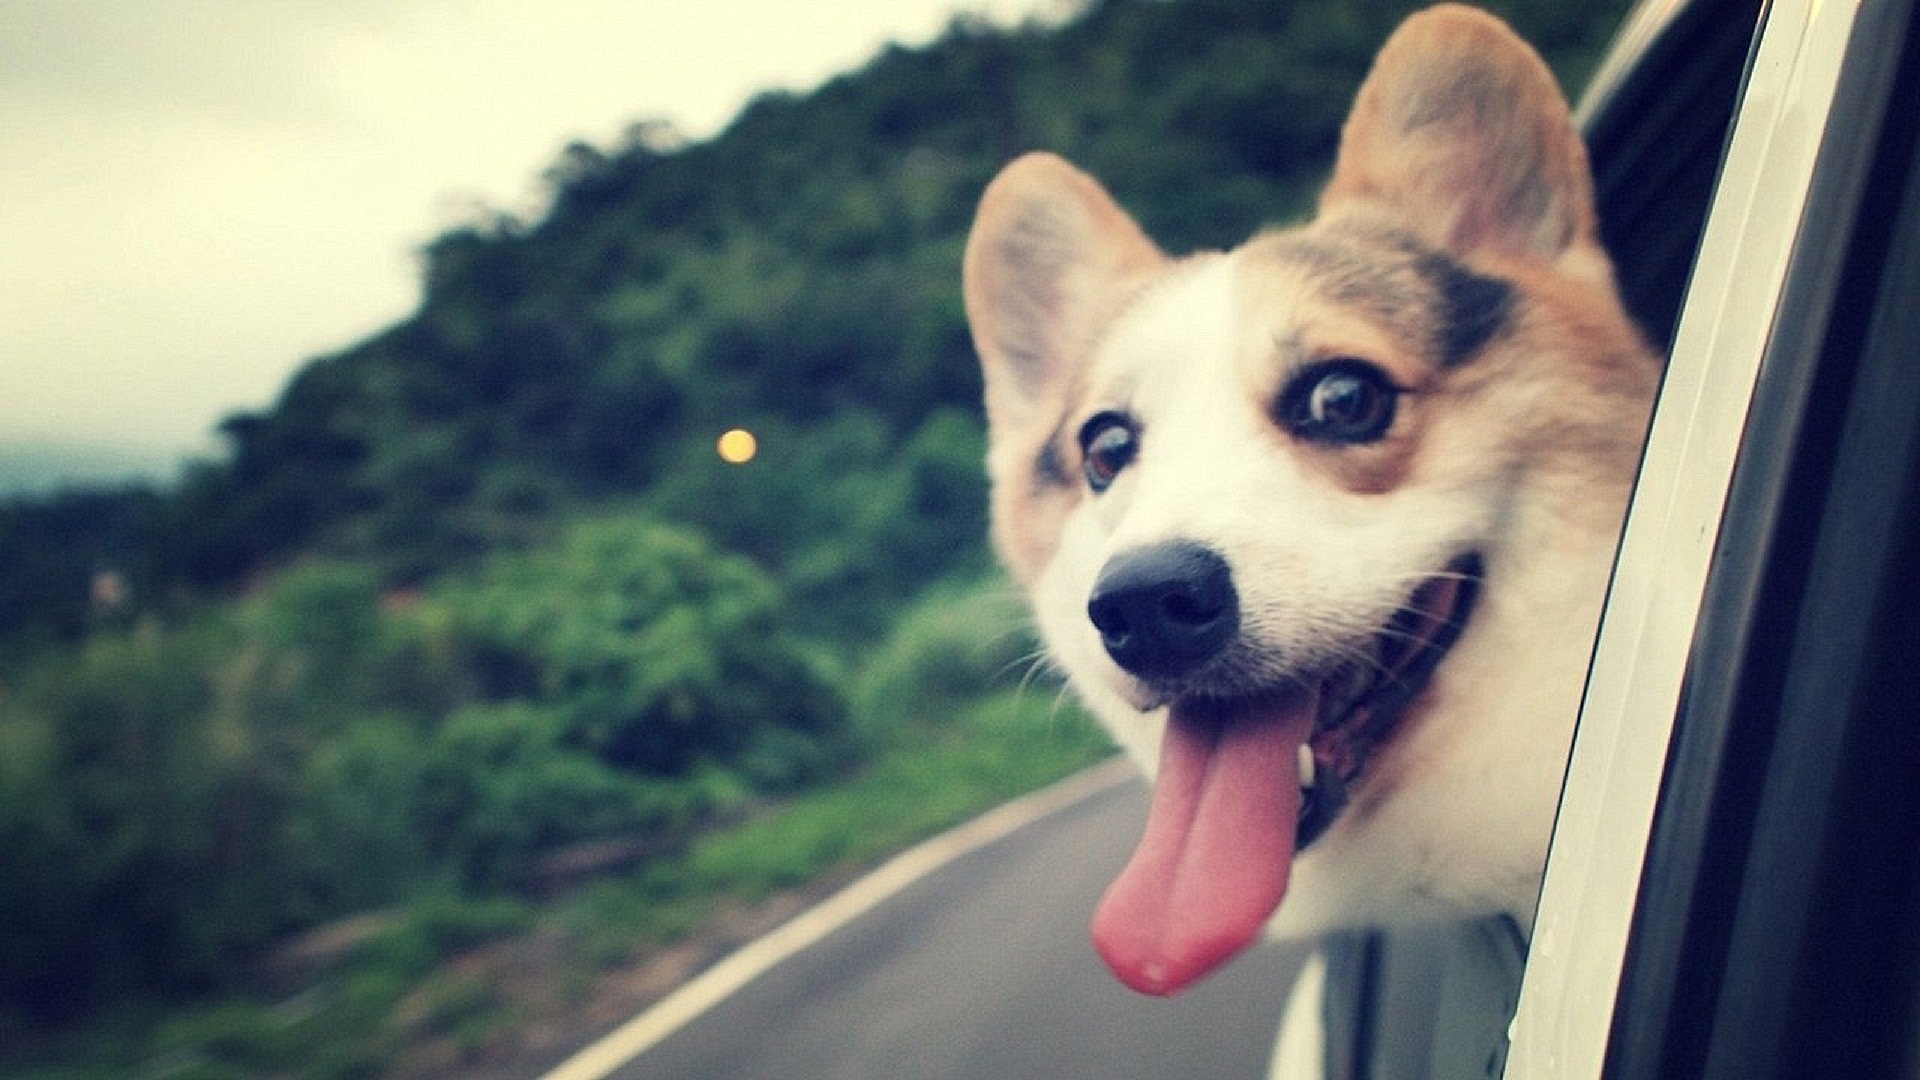 Dog Full HD Wallpaper and Background Image | 1920x1080 | ID:301766